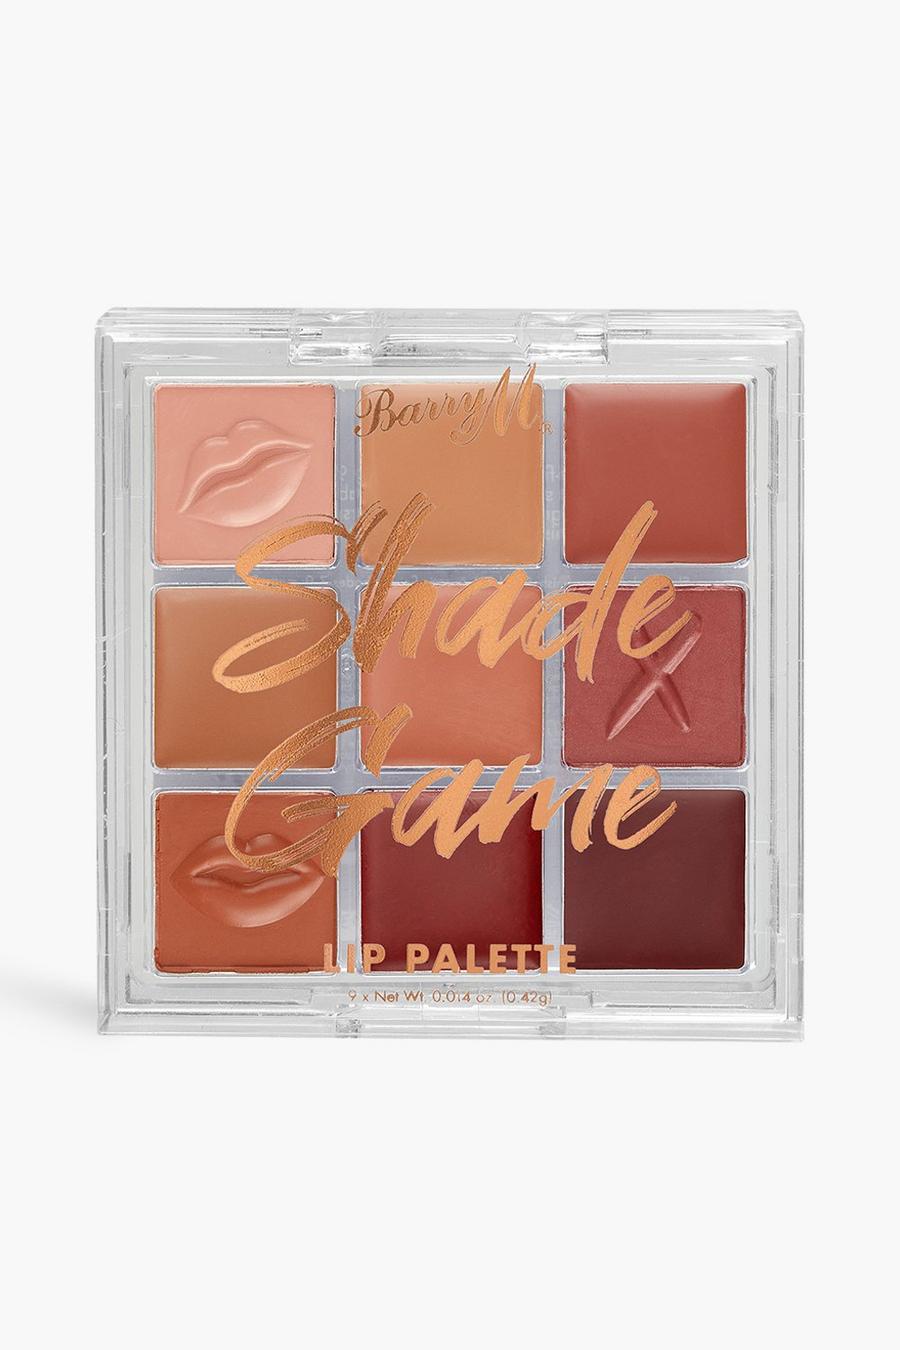 Barry M Shade Game Lippen-Palette, Multi mehrfarbig